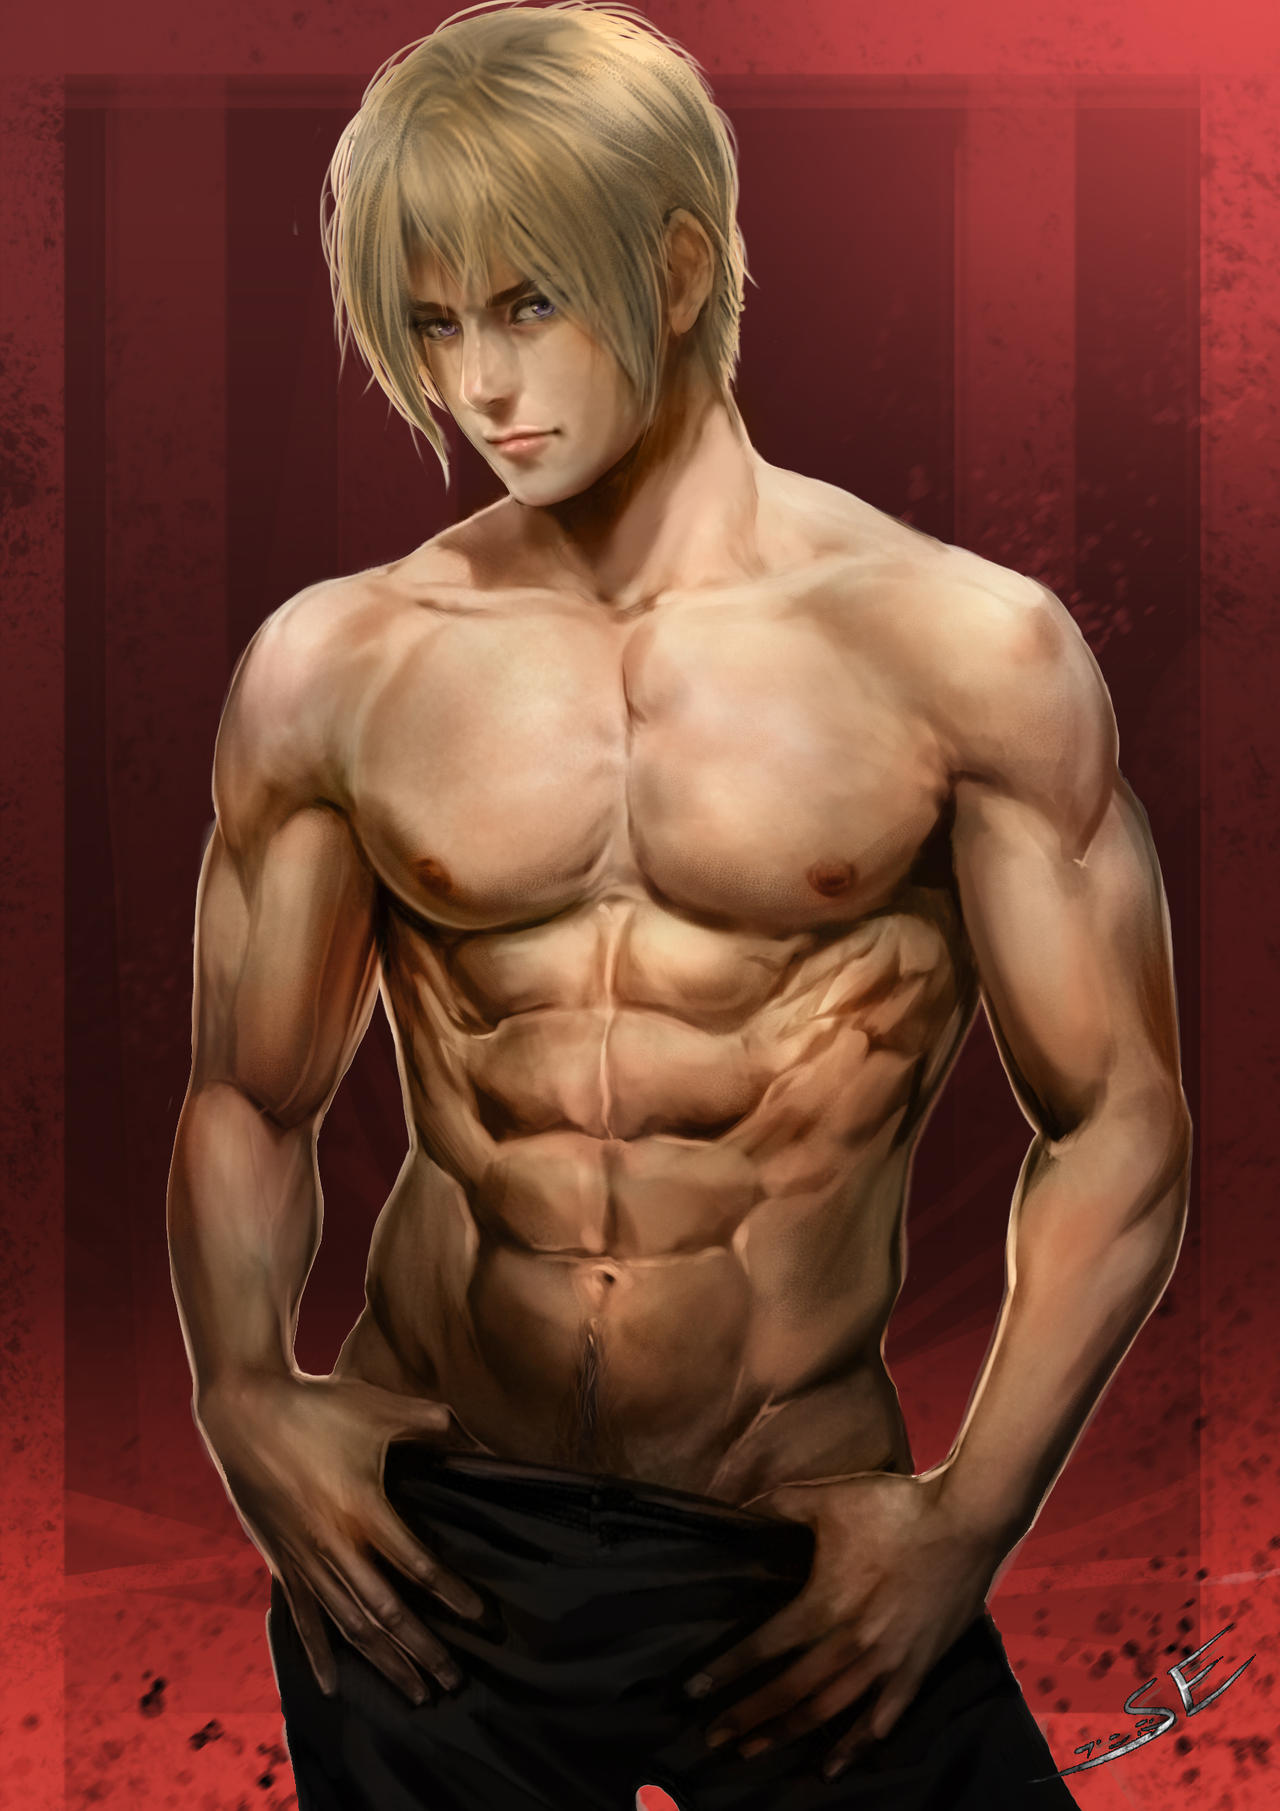 Download this Muscle Man Sitegg picture